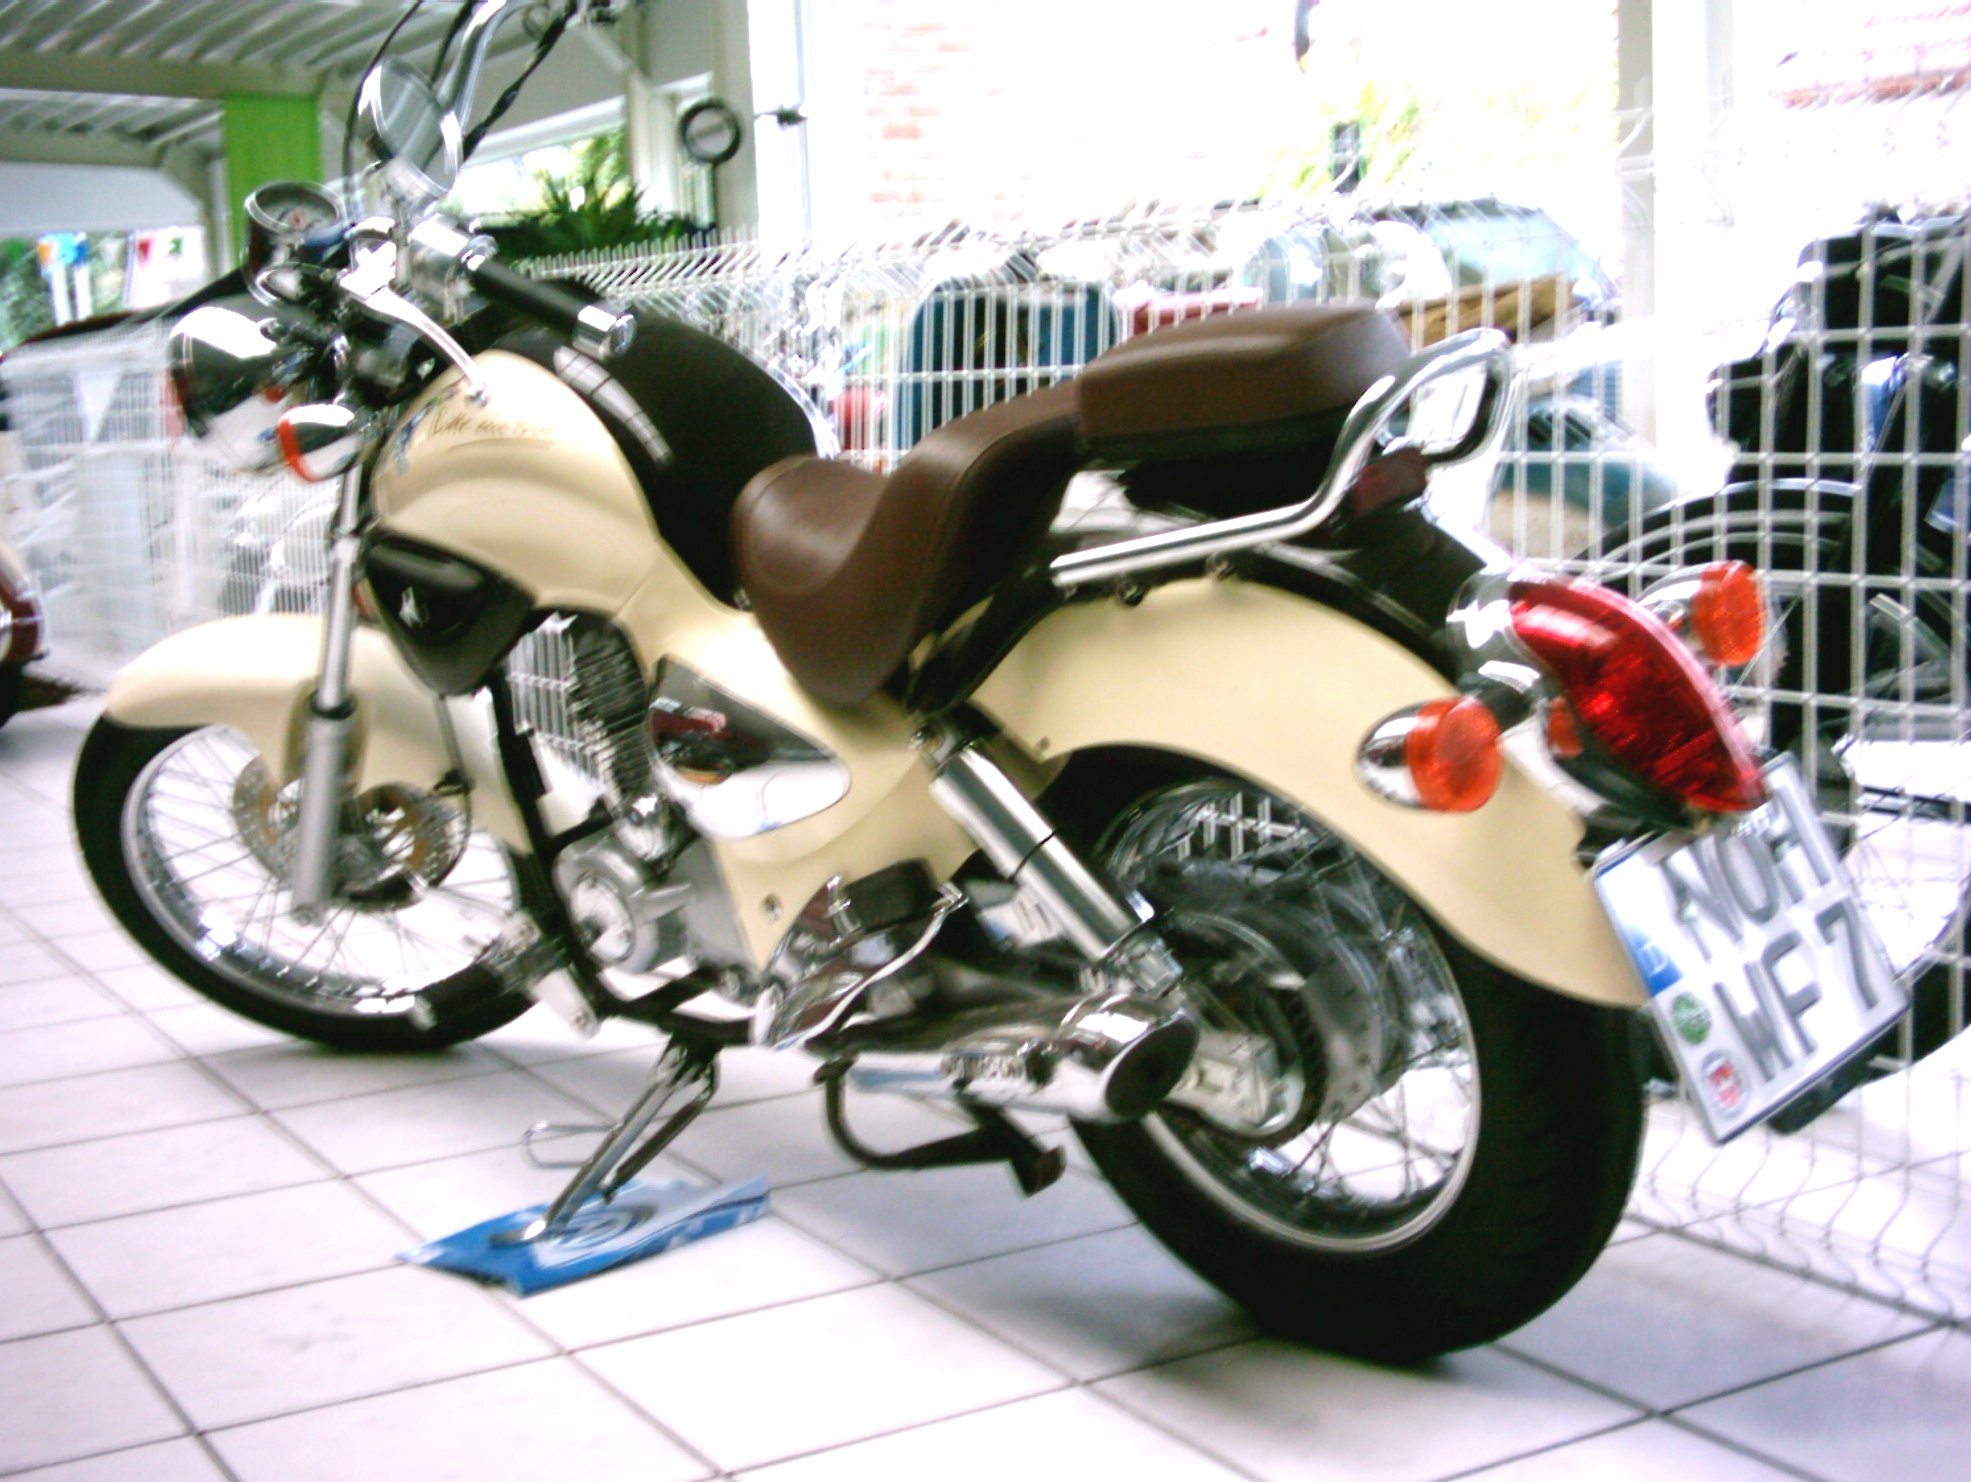 kymco hipster 125-pic. 1